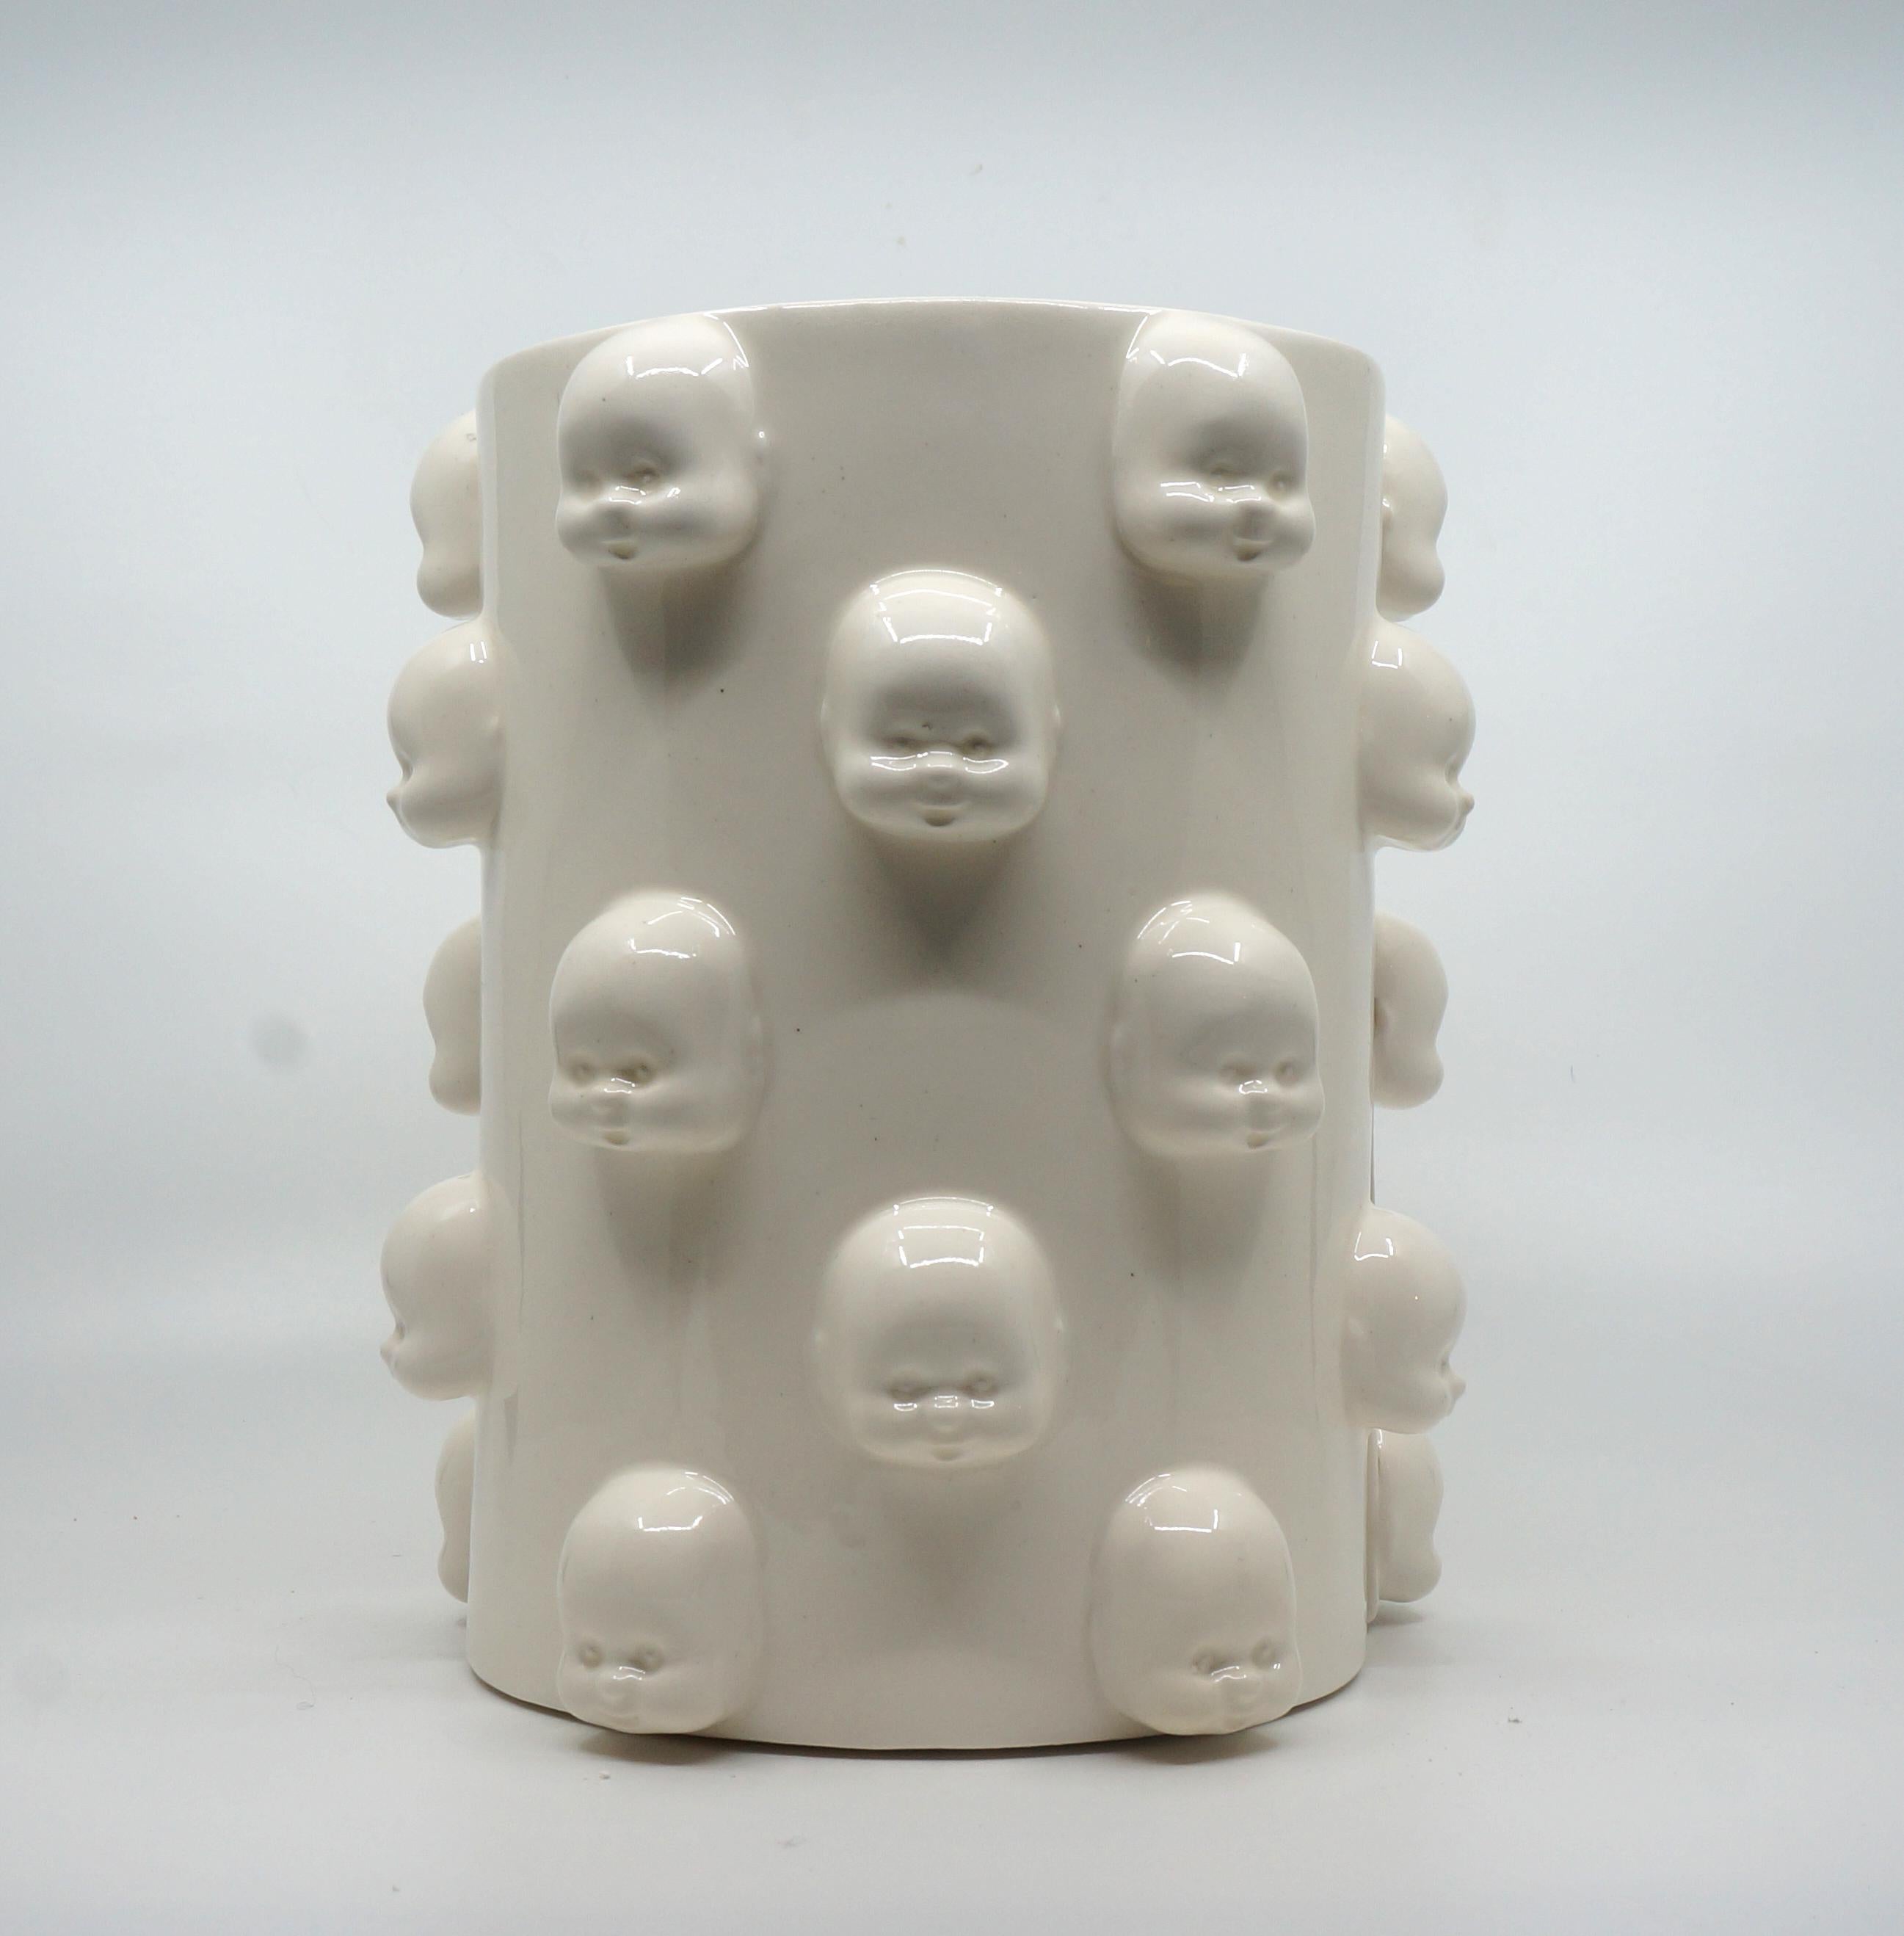 Porcelain Book Holder
(Two Piece)

Deniz Pireci's works; He tries to rediscover all the meanings contained in ceramics as a tool, to emphasize them even more, and sometimes simply to reveal them. As a tool, it is obvious that porcelain refers to